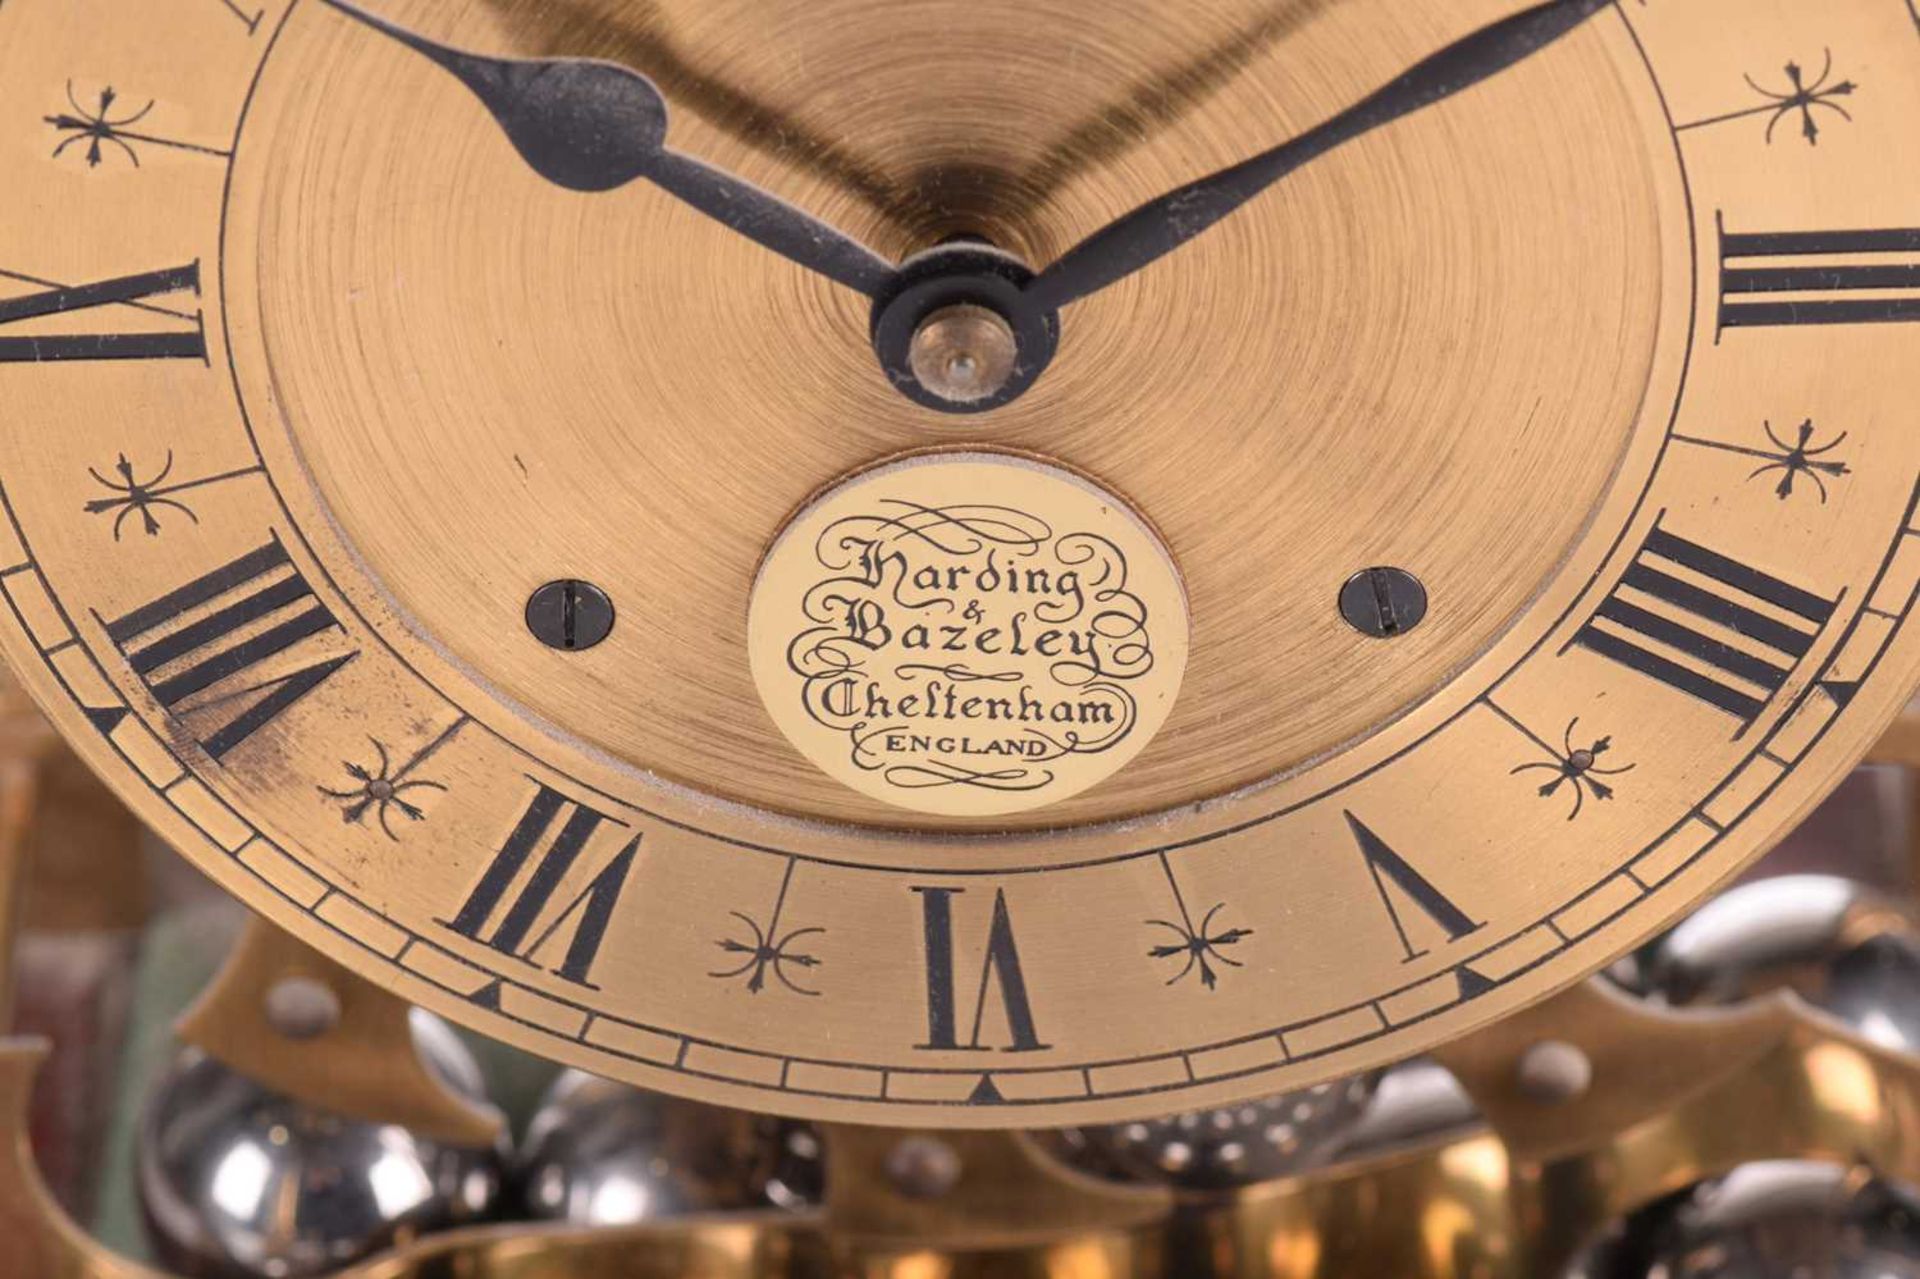 A modern lacquered brass spherical weight timepiece, by Harding & Bazeley, Cheltenham, England, - Image 6 of 8